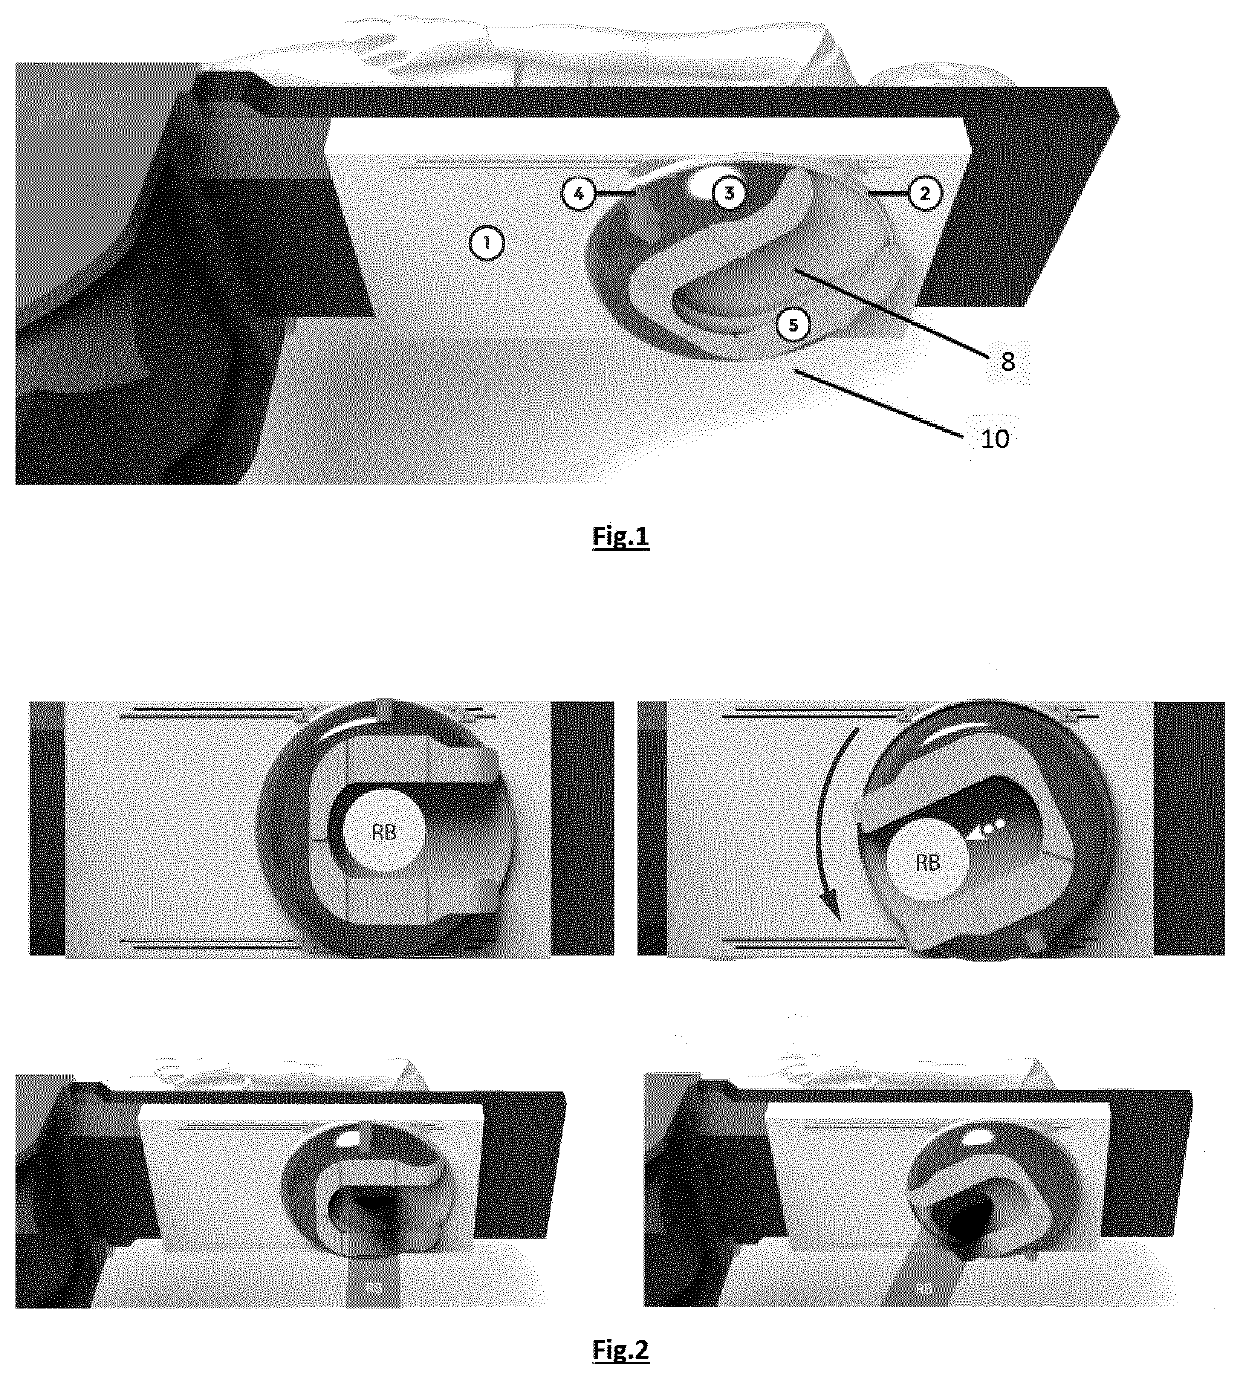 Shielding device for use in medical imaging